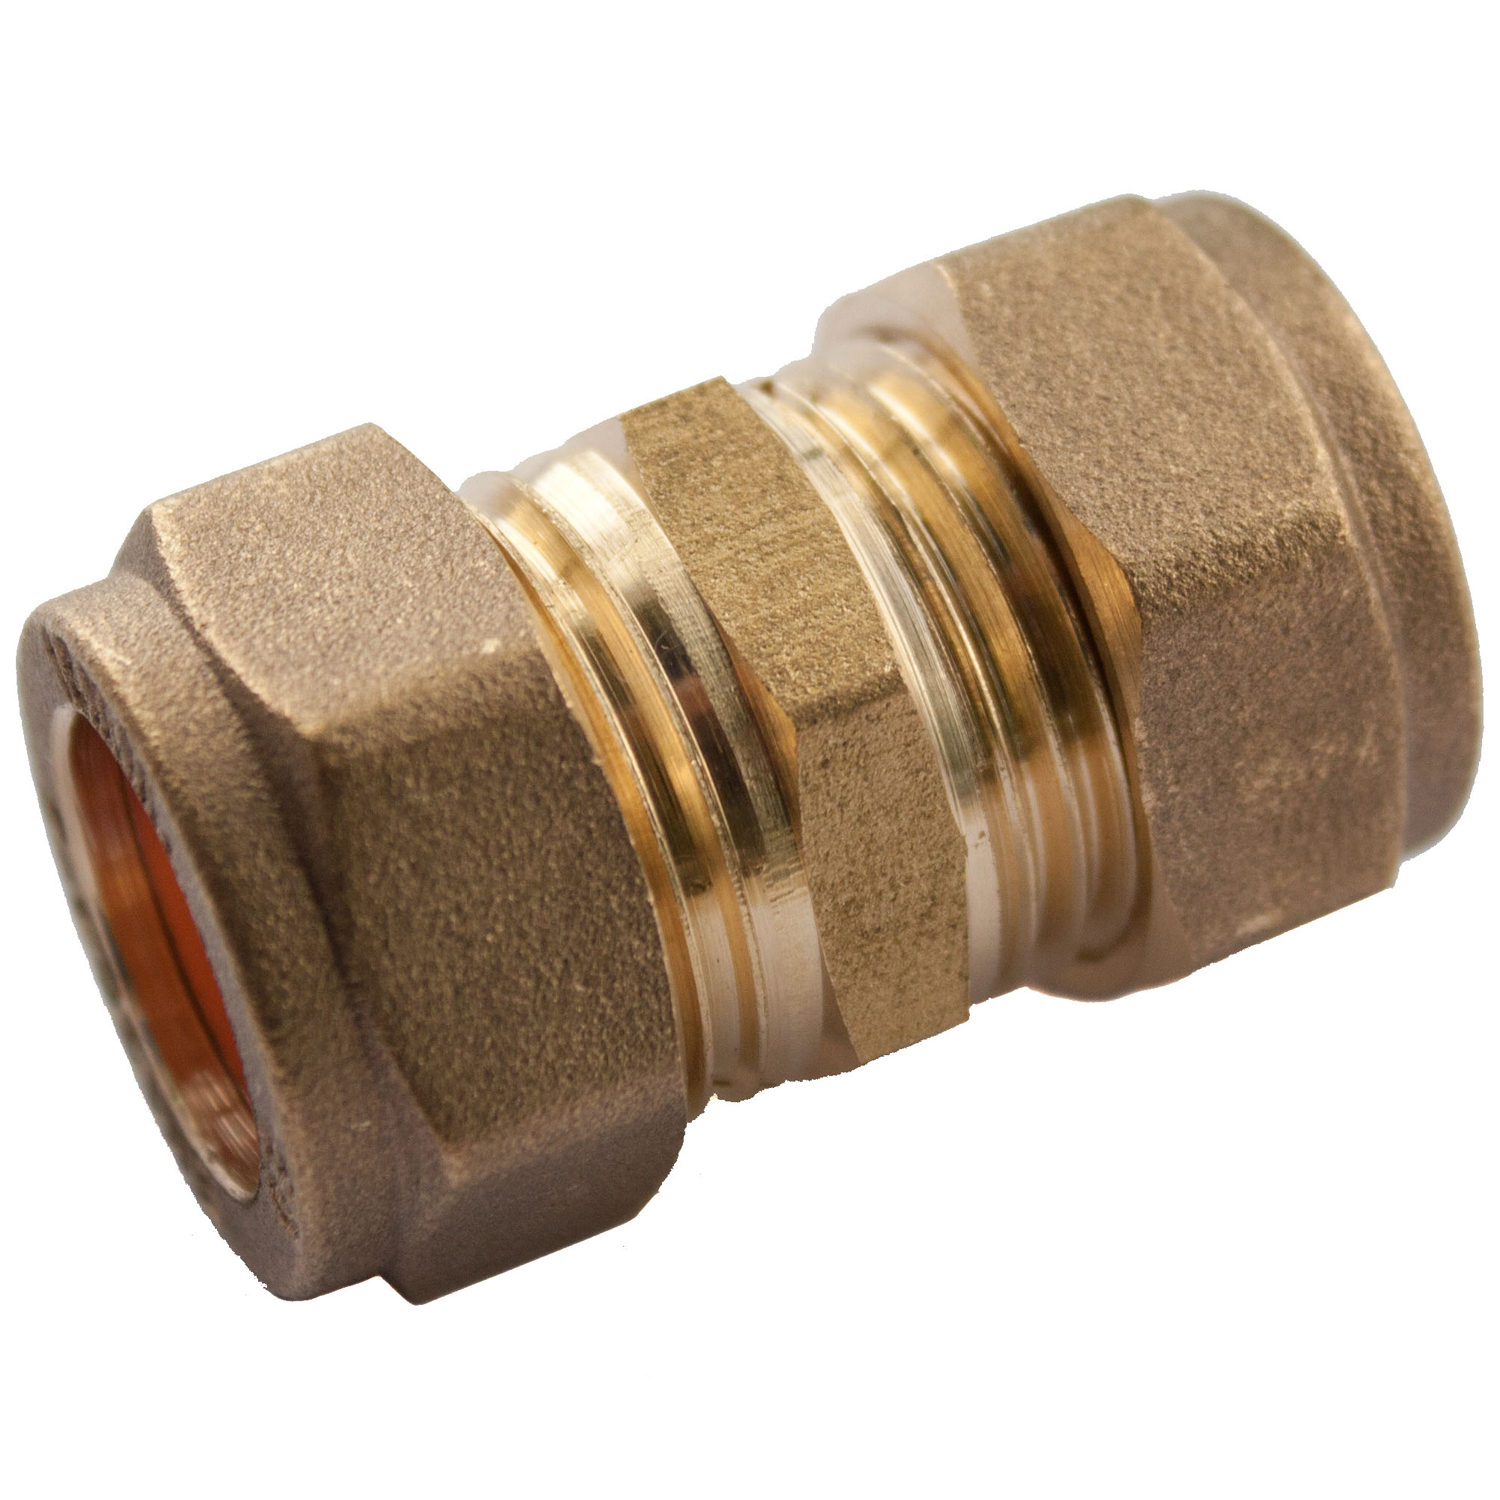 Oracstar 15mm Compression Straight Connector Image